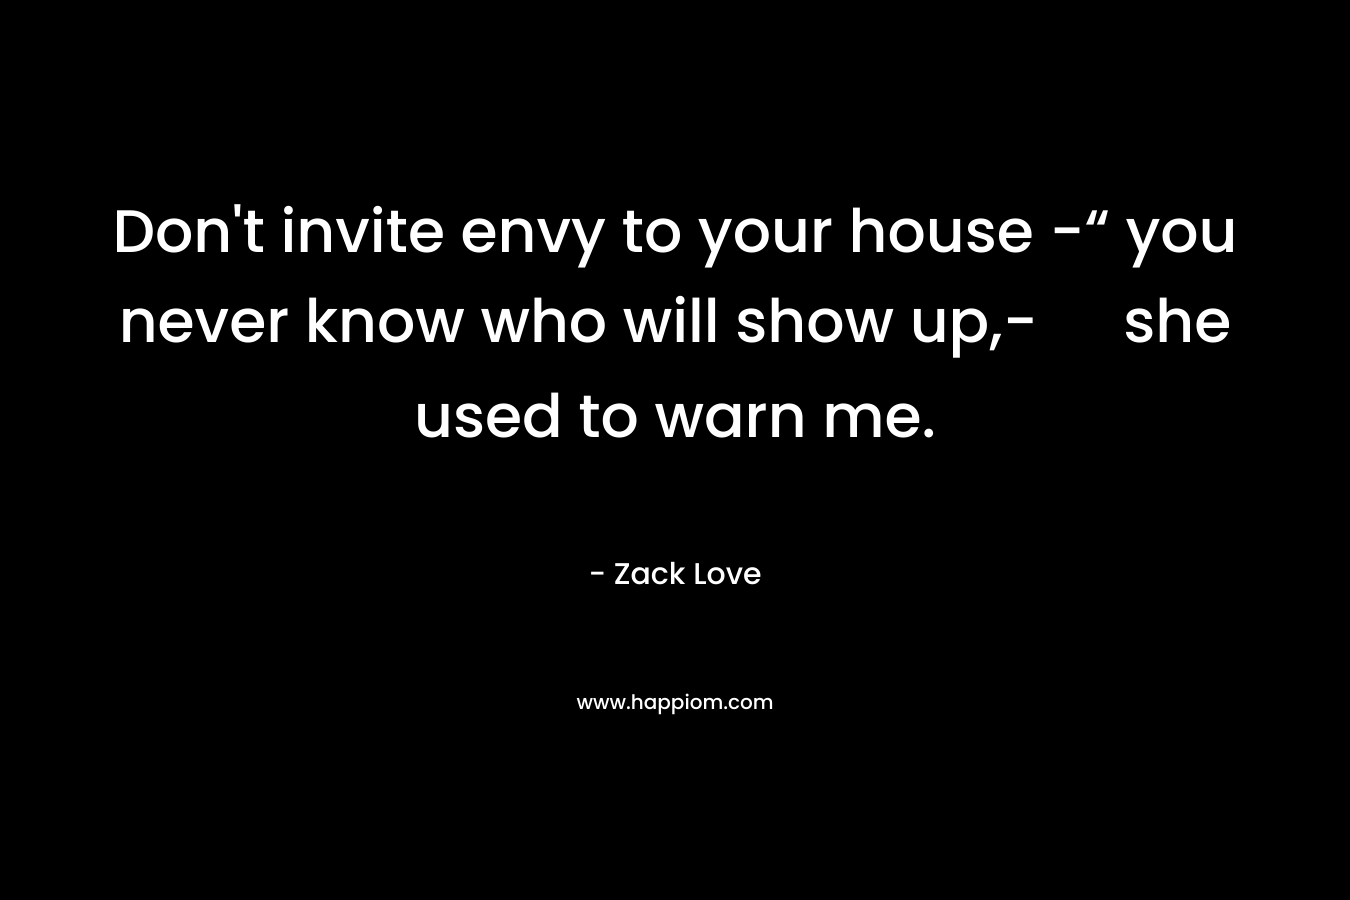 Don’t invite envy to your house -“ you never know who will show up,- she used to warn me. – Zack Love